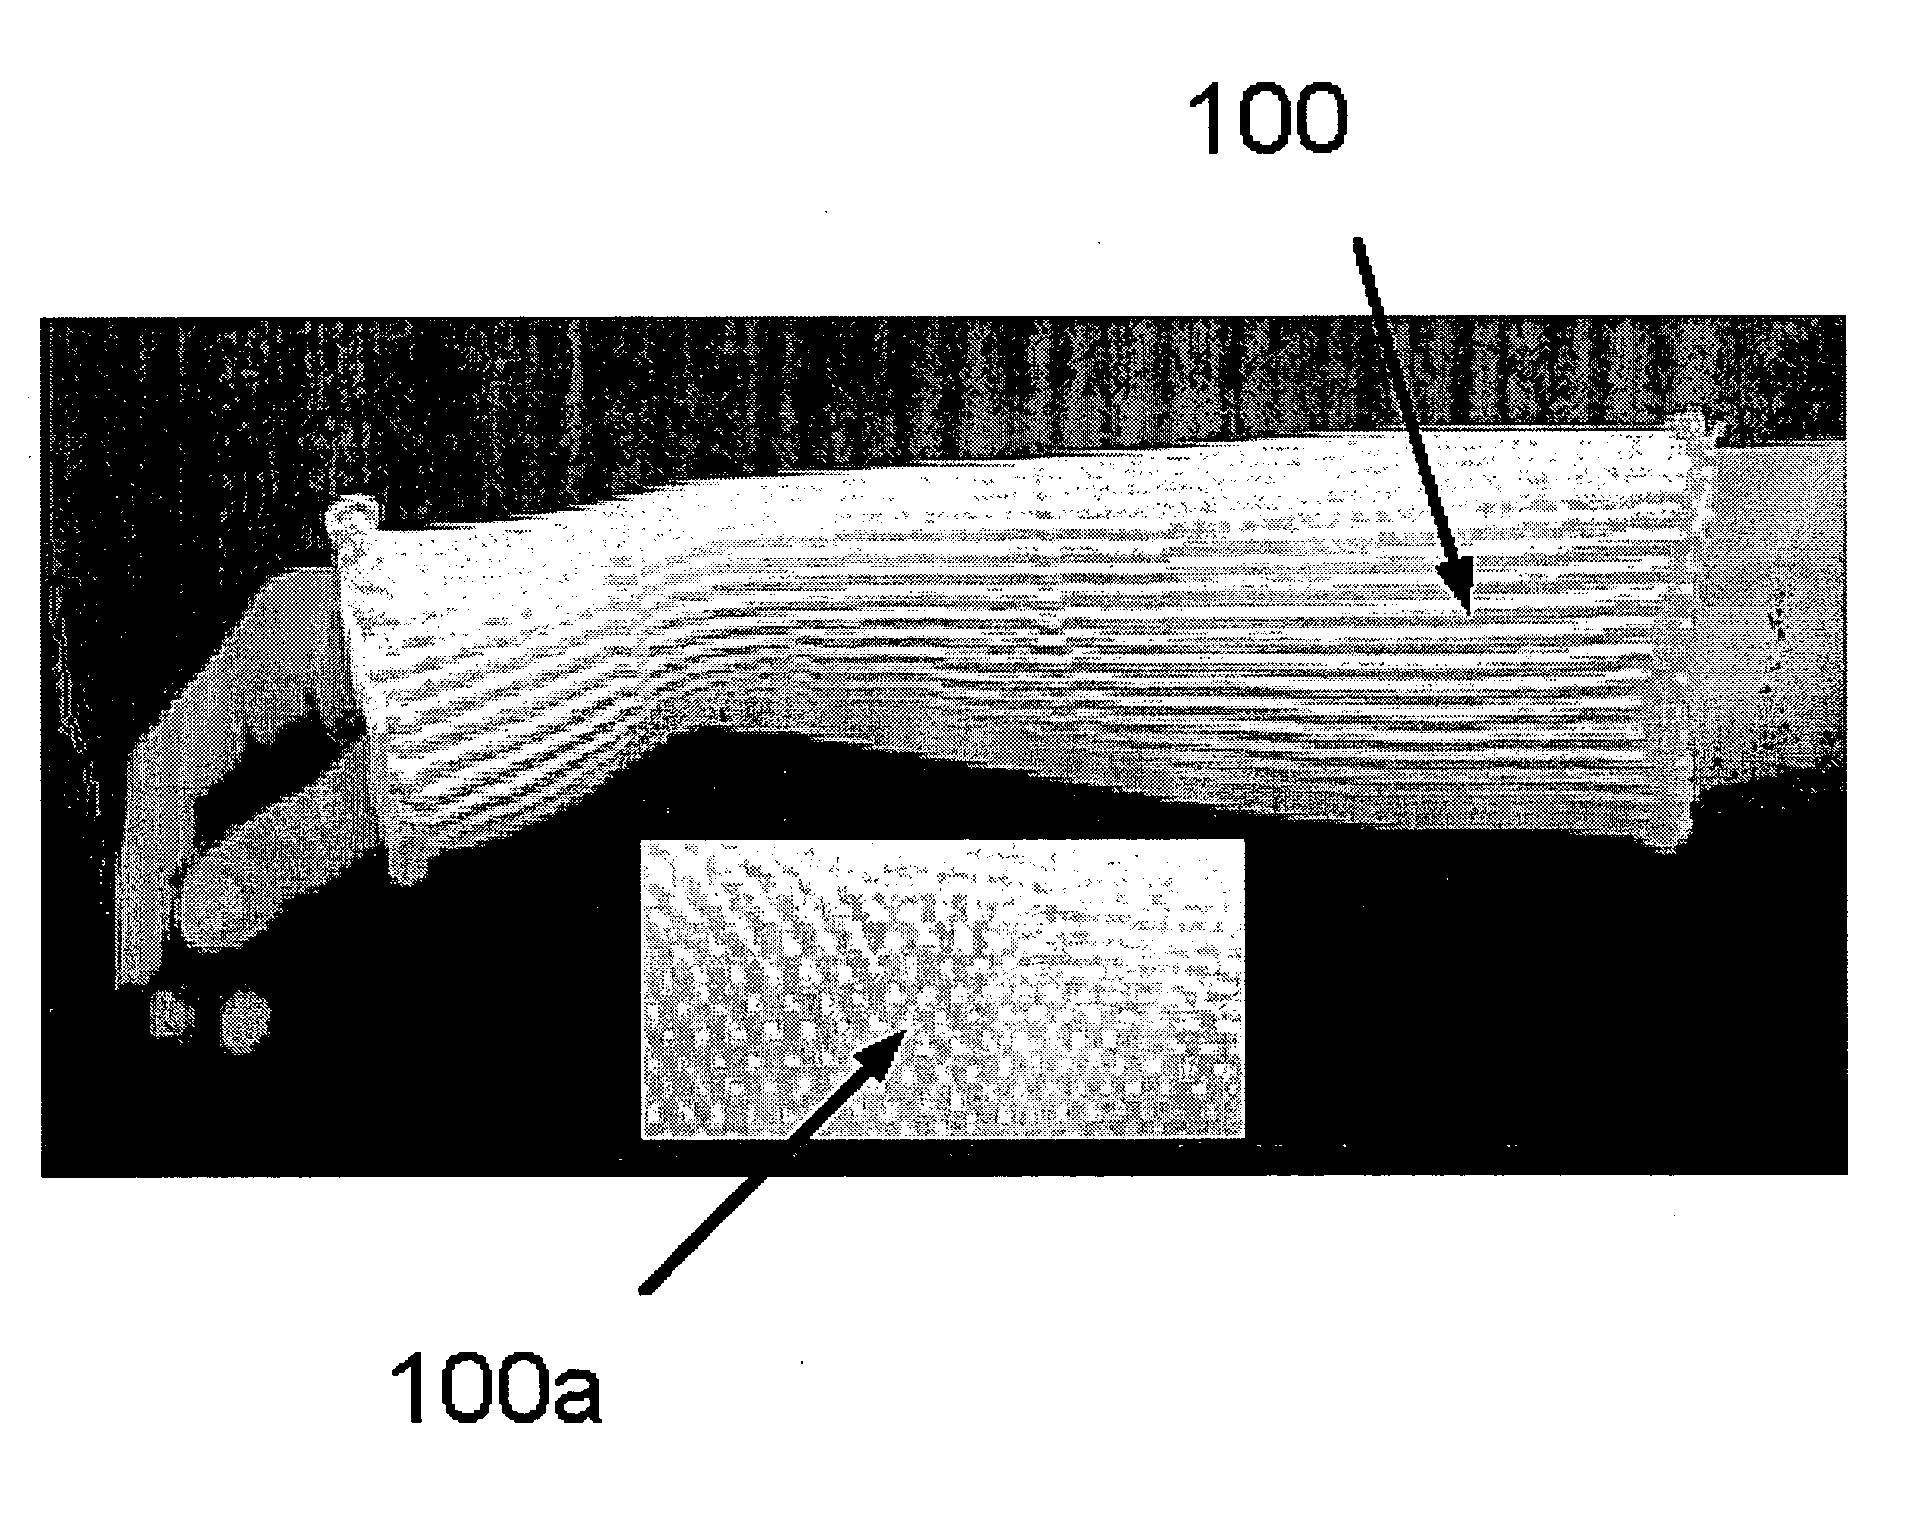 Sleeve-like knitted structure for use as a castliner